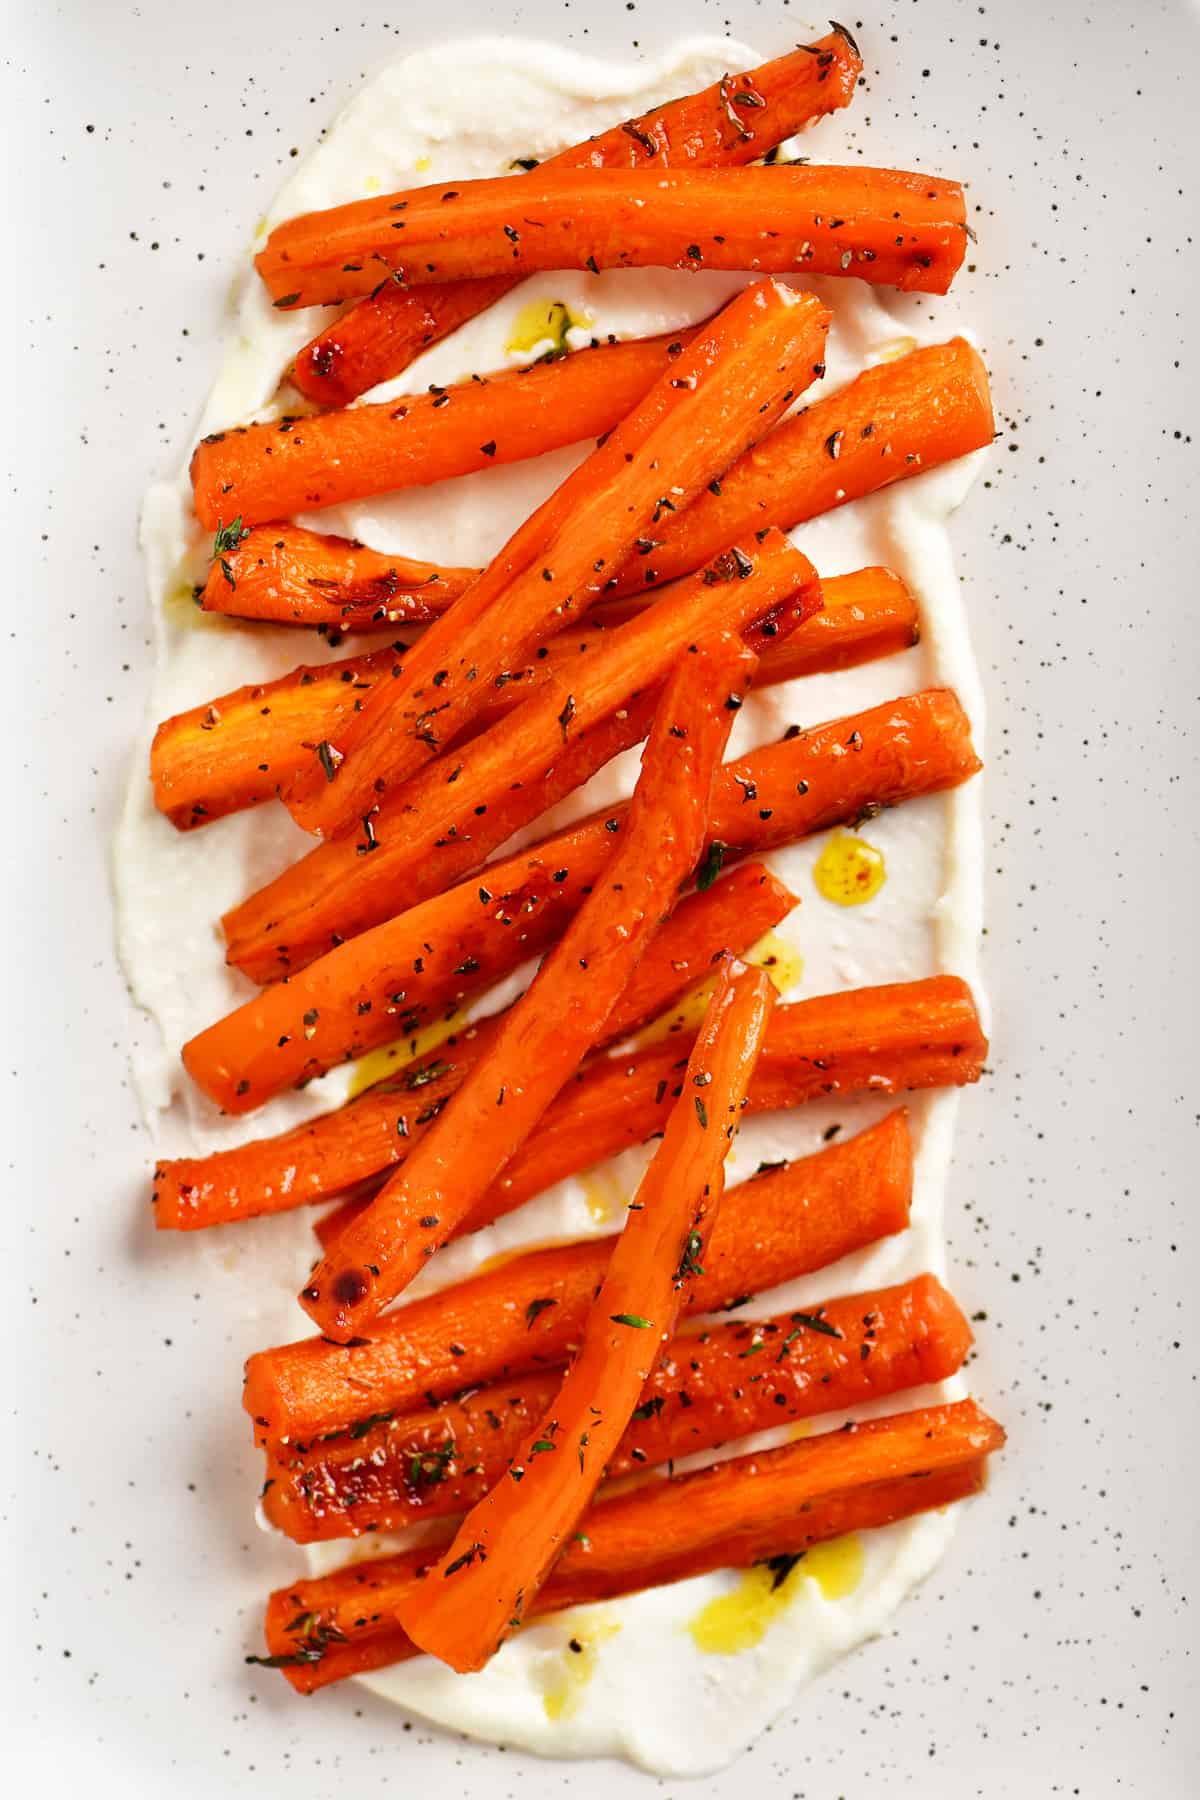 a photo of the roasted carrots from above